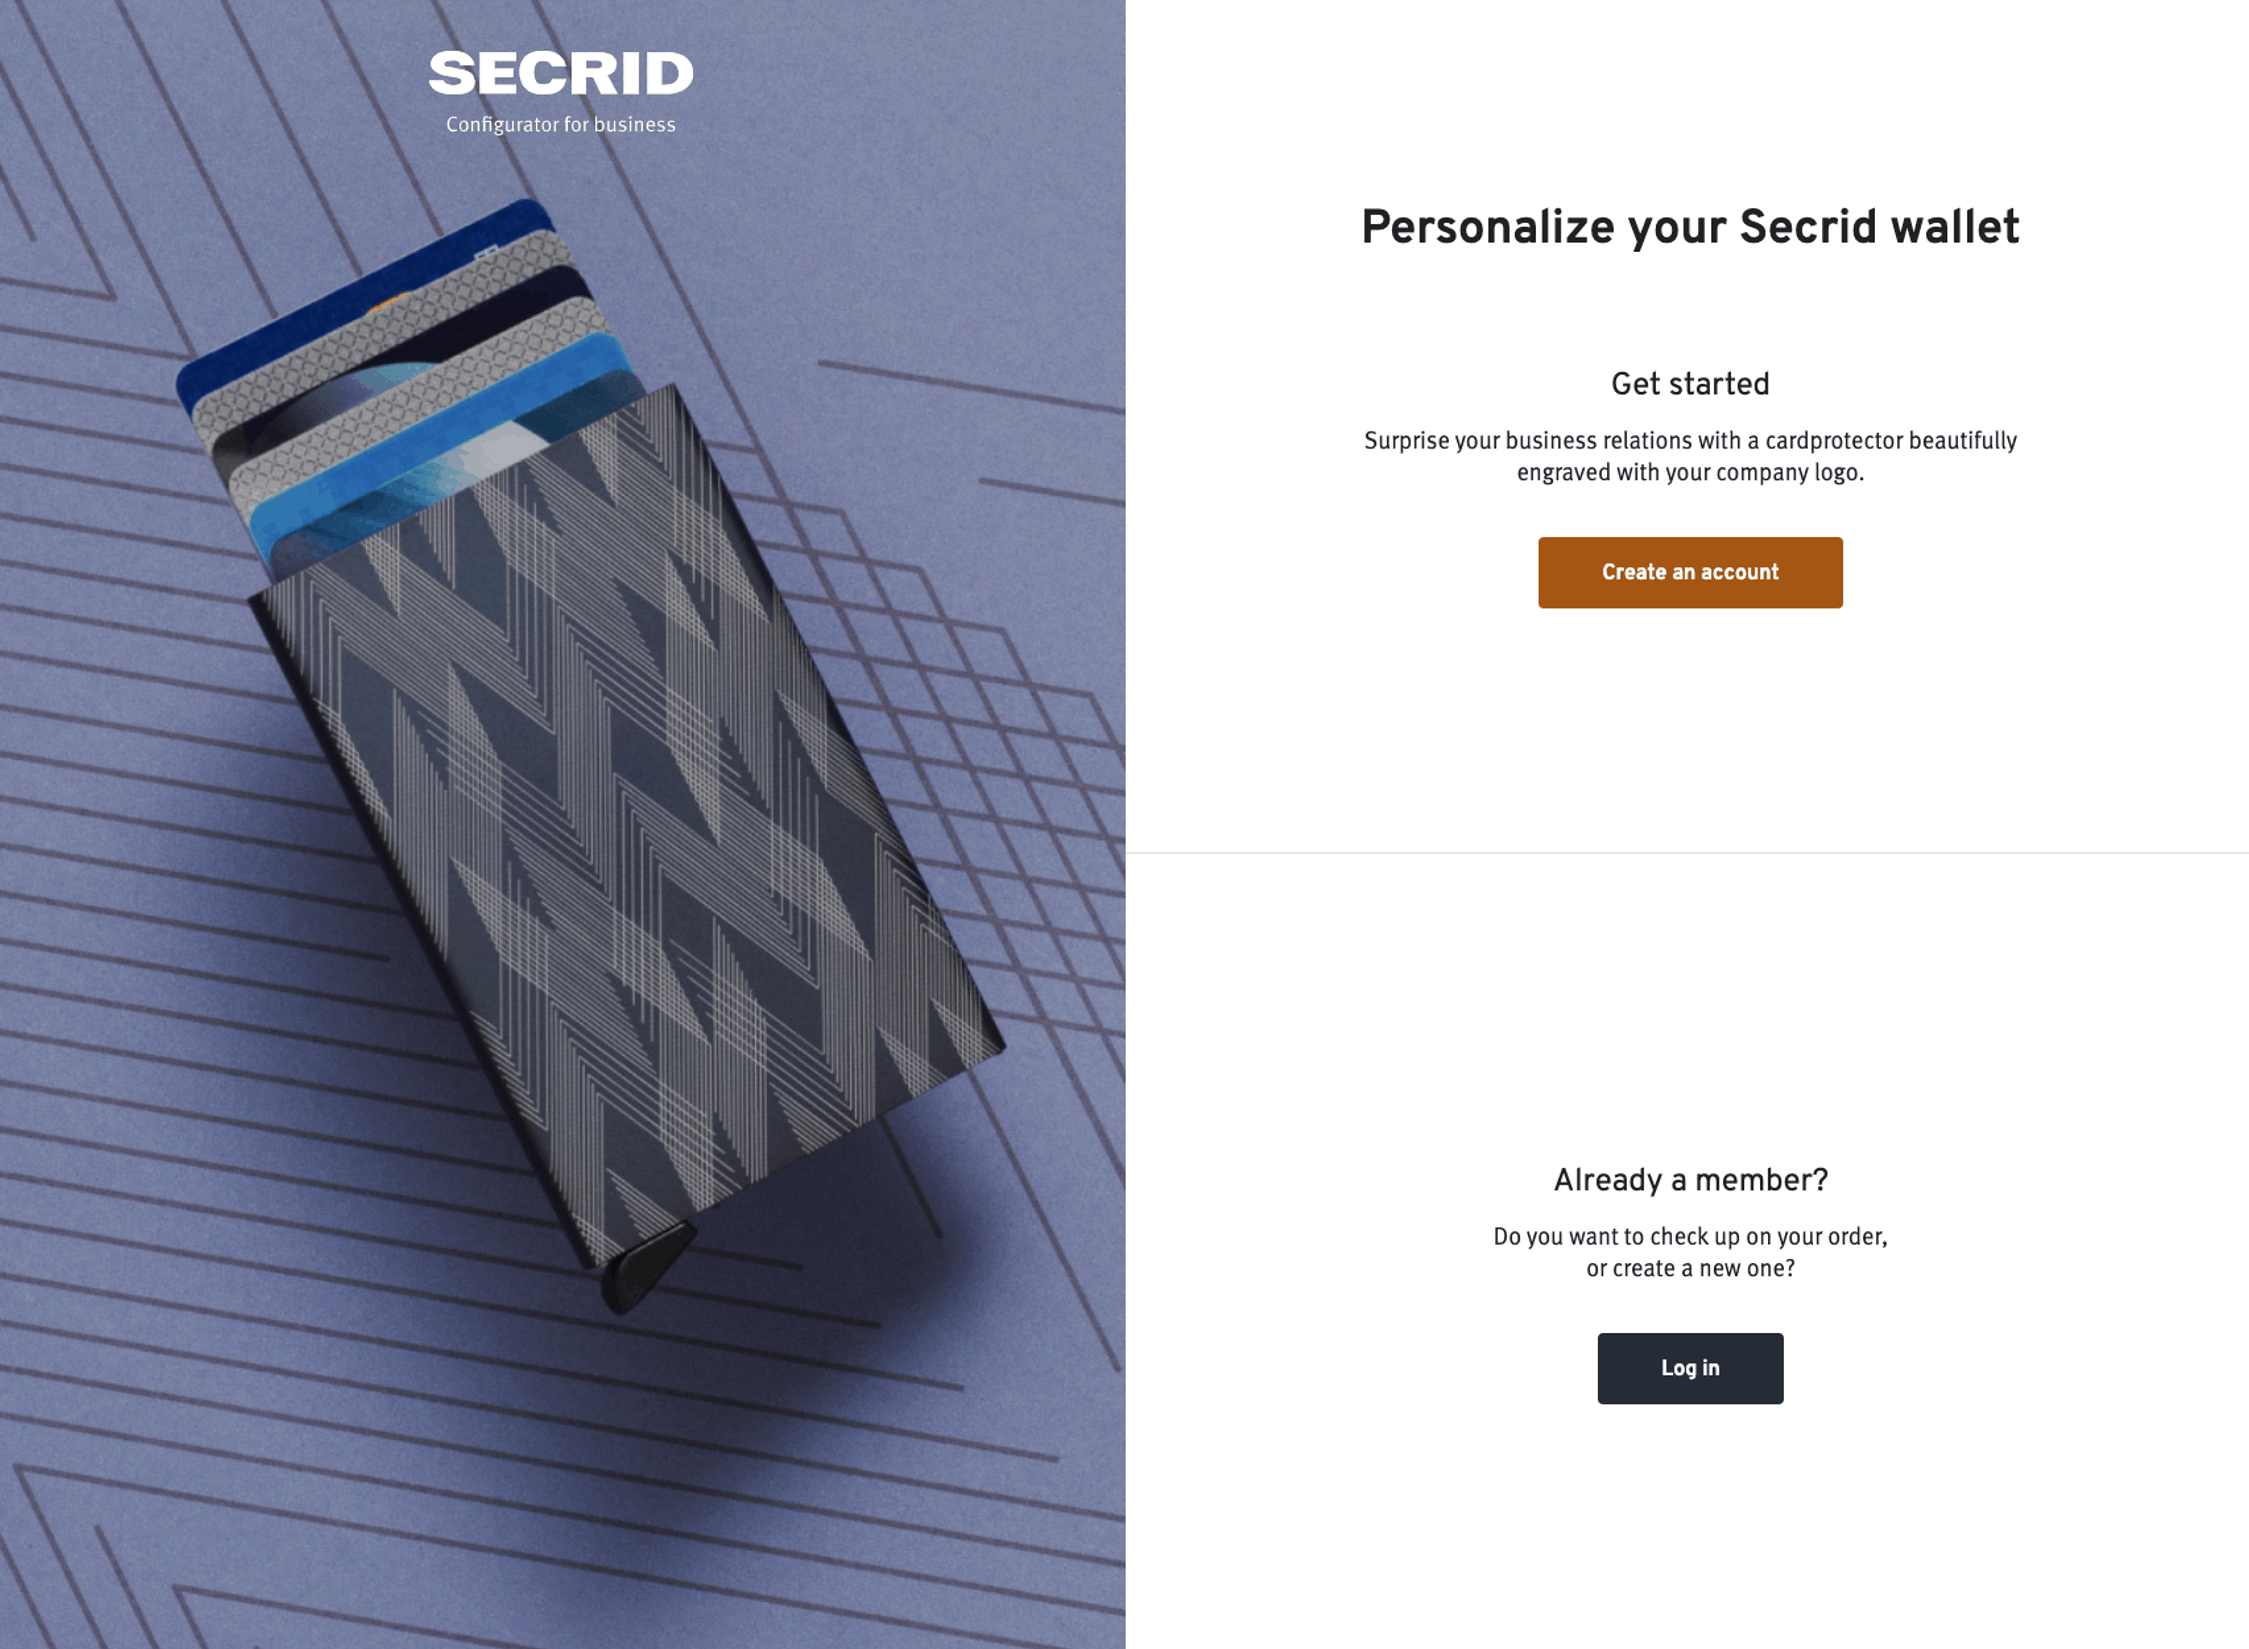 The Secrid portal for corporate gifts.